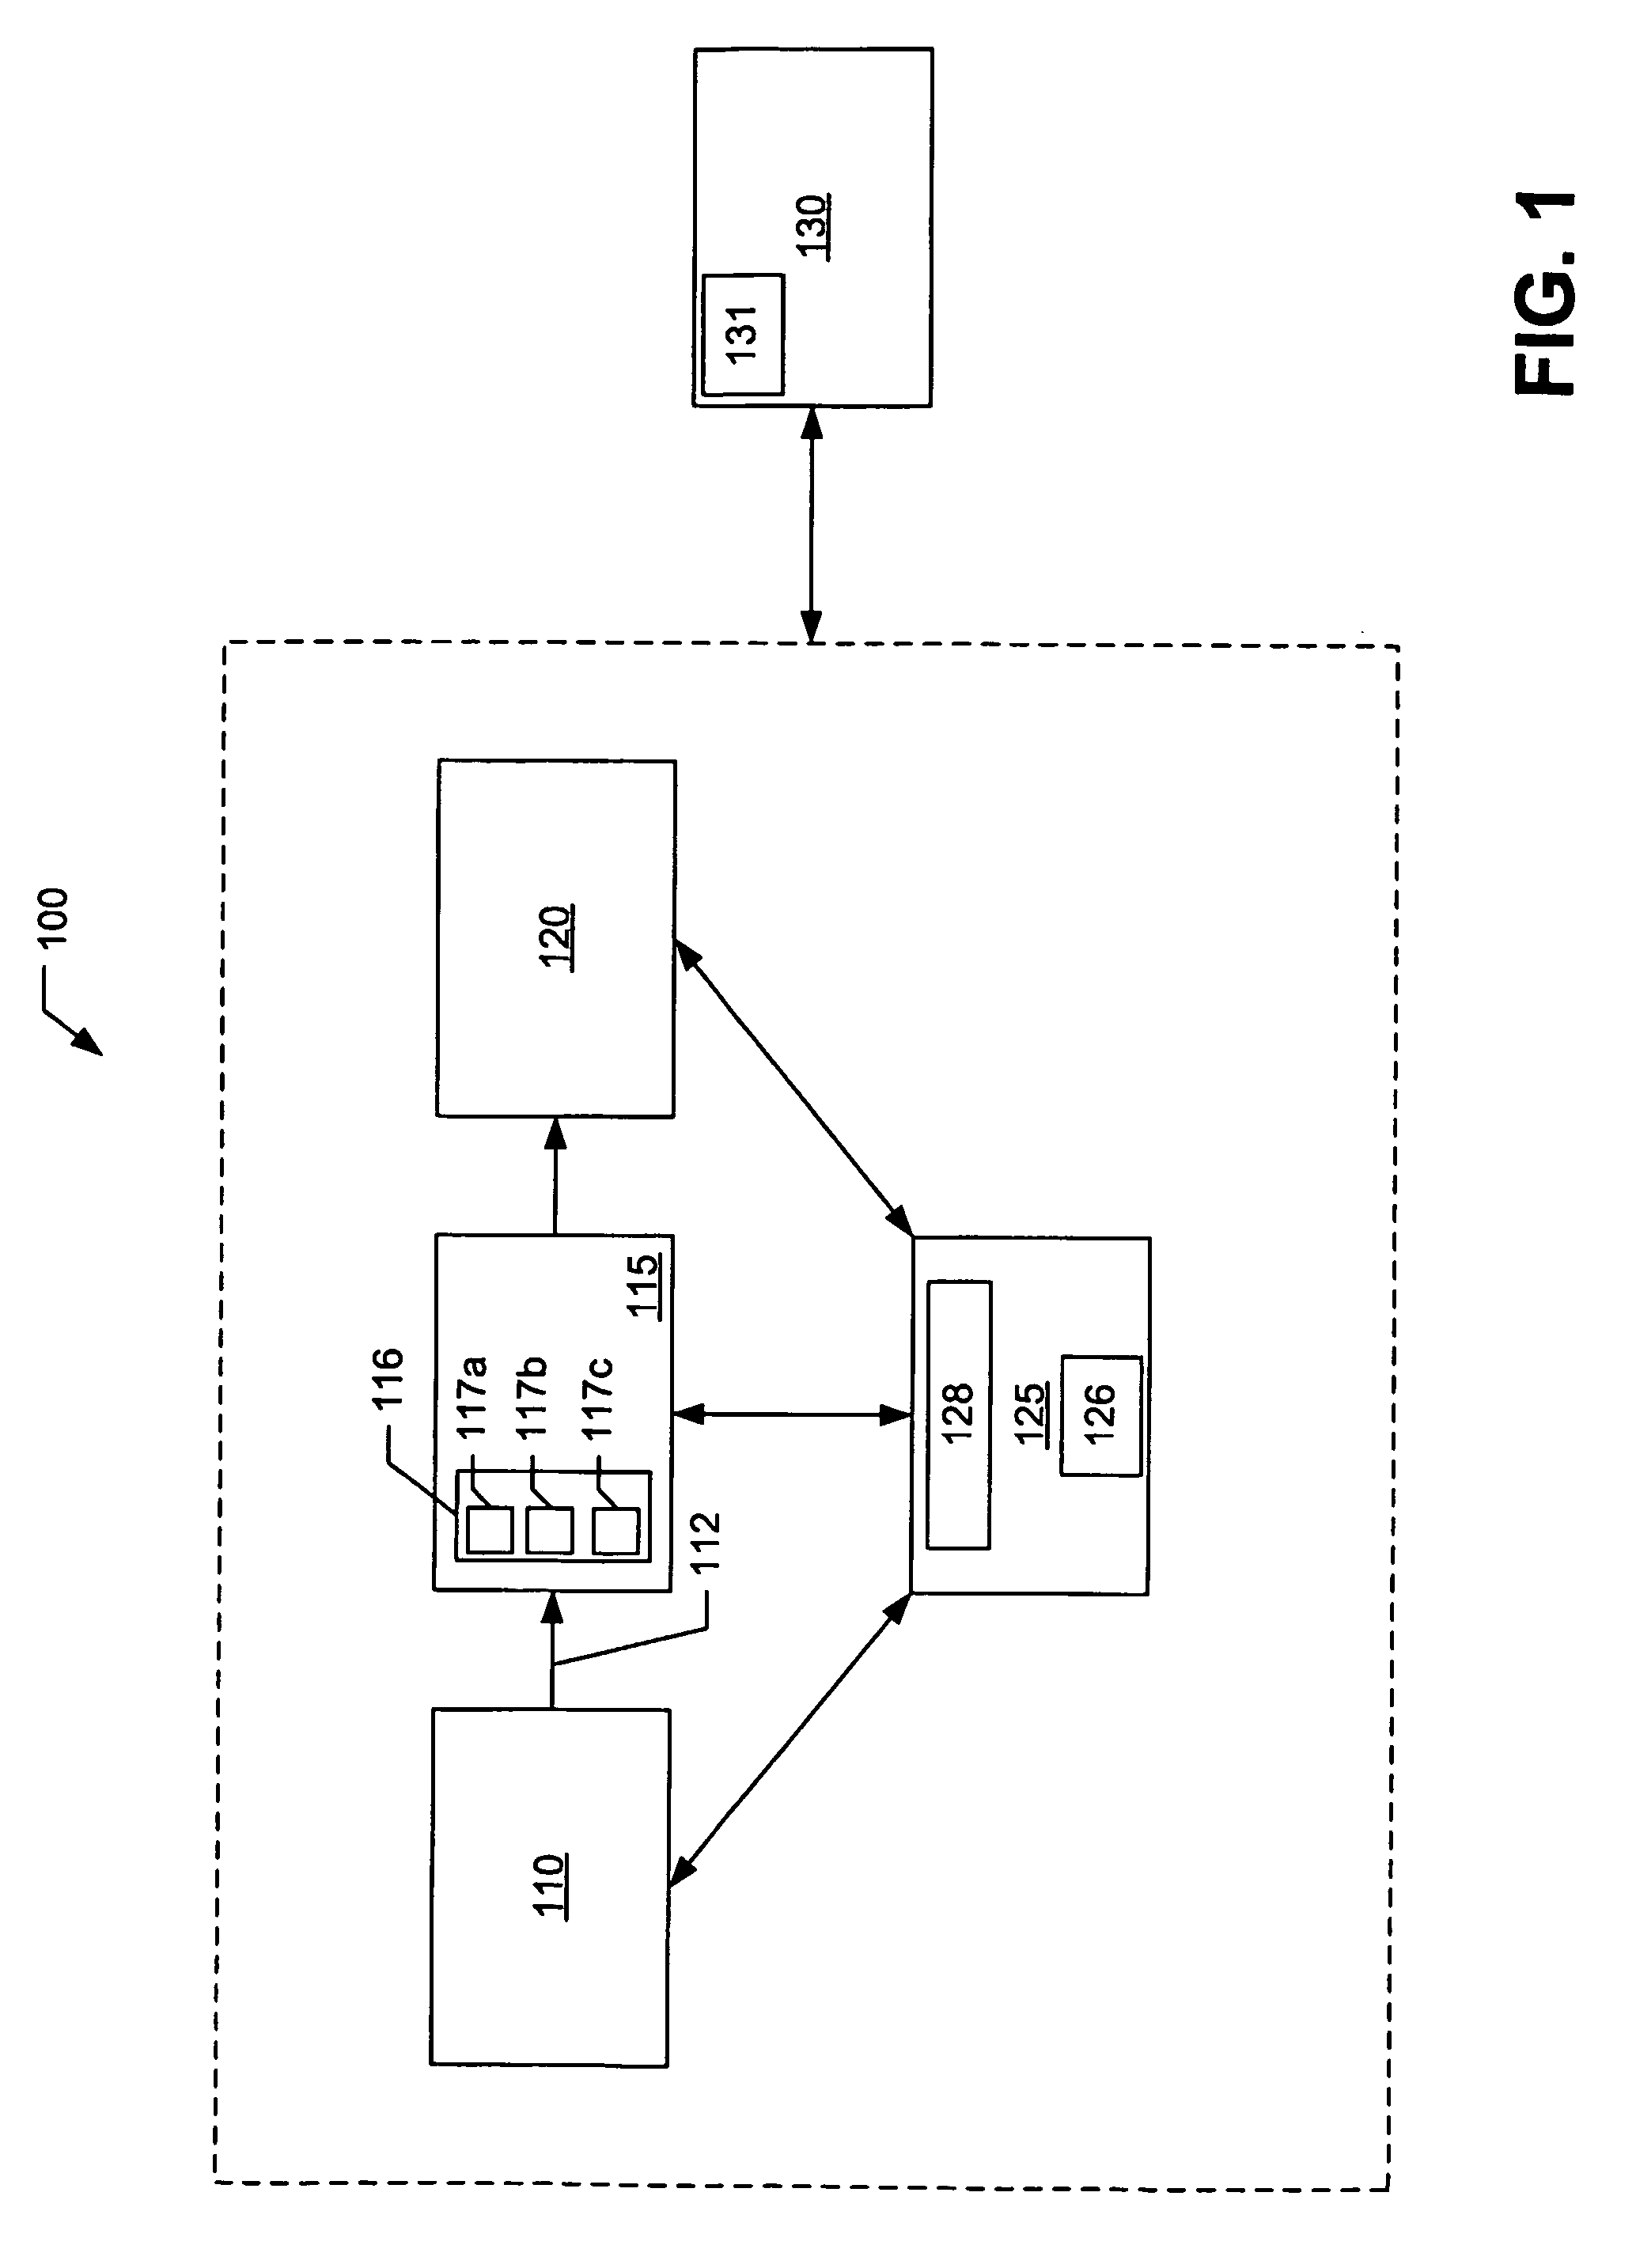 System for alternately pulsing energy of accelerated electrons bombarding a conversion target